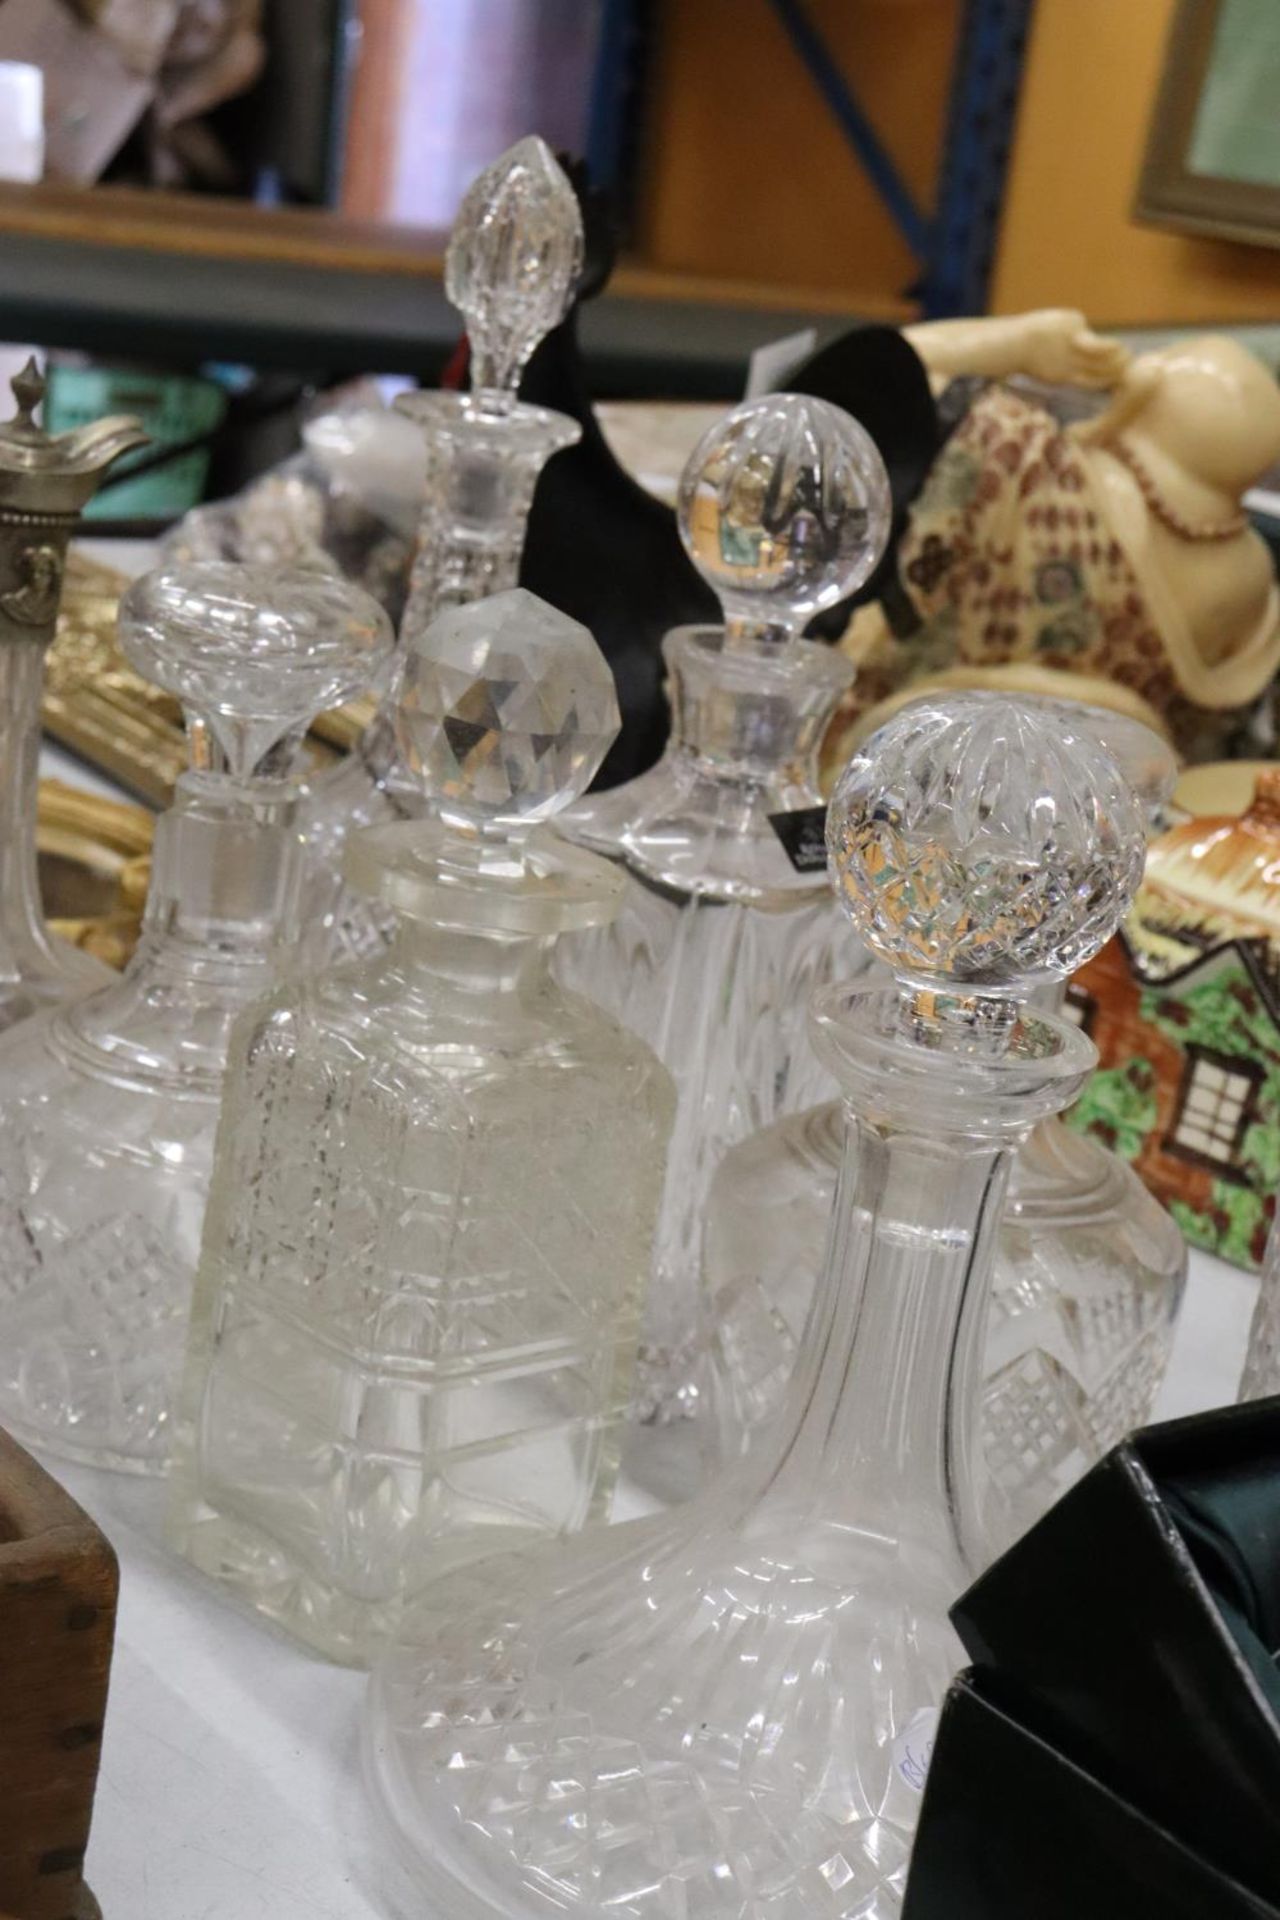 VARIOIUS GLASS WARE TO INCLUDE A CLARET JUG, SEVEN DECANTERS AND A BOXED PAUIR OF CHAMPAGNE GLASSES - Image 8 of 8